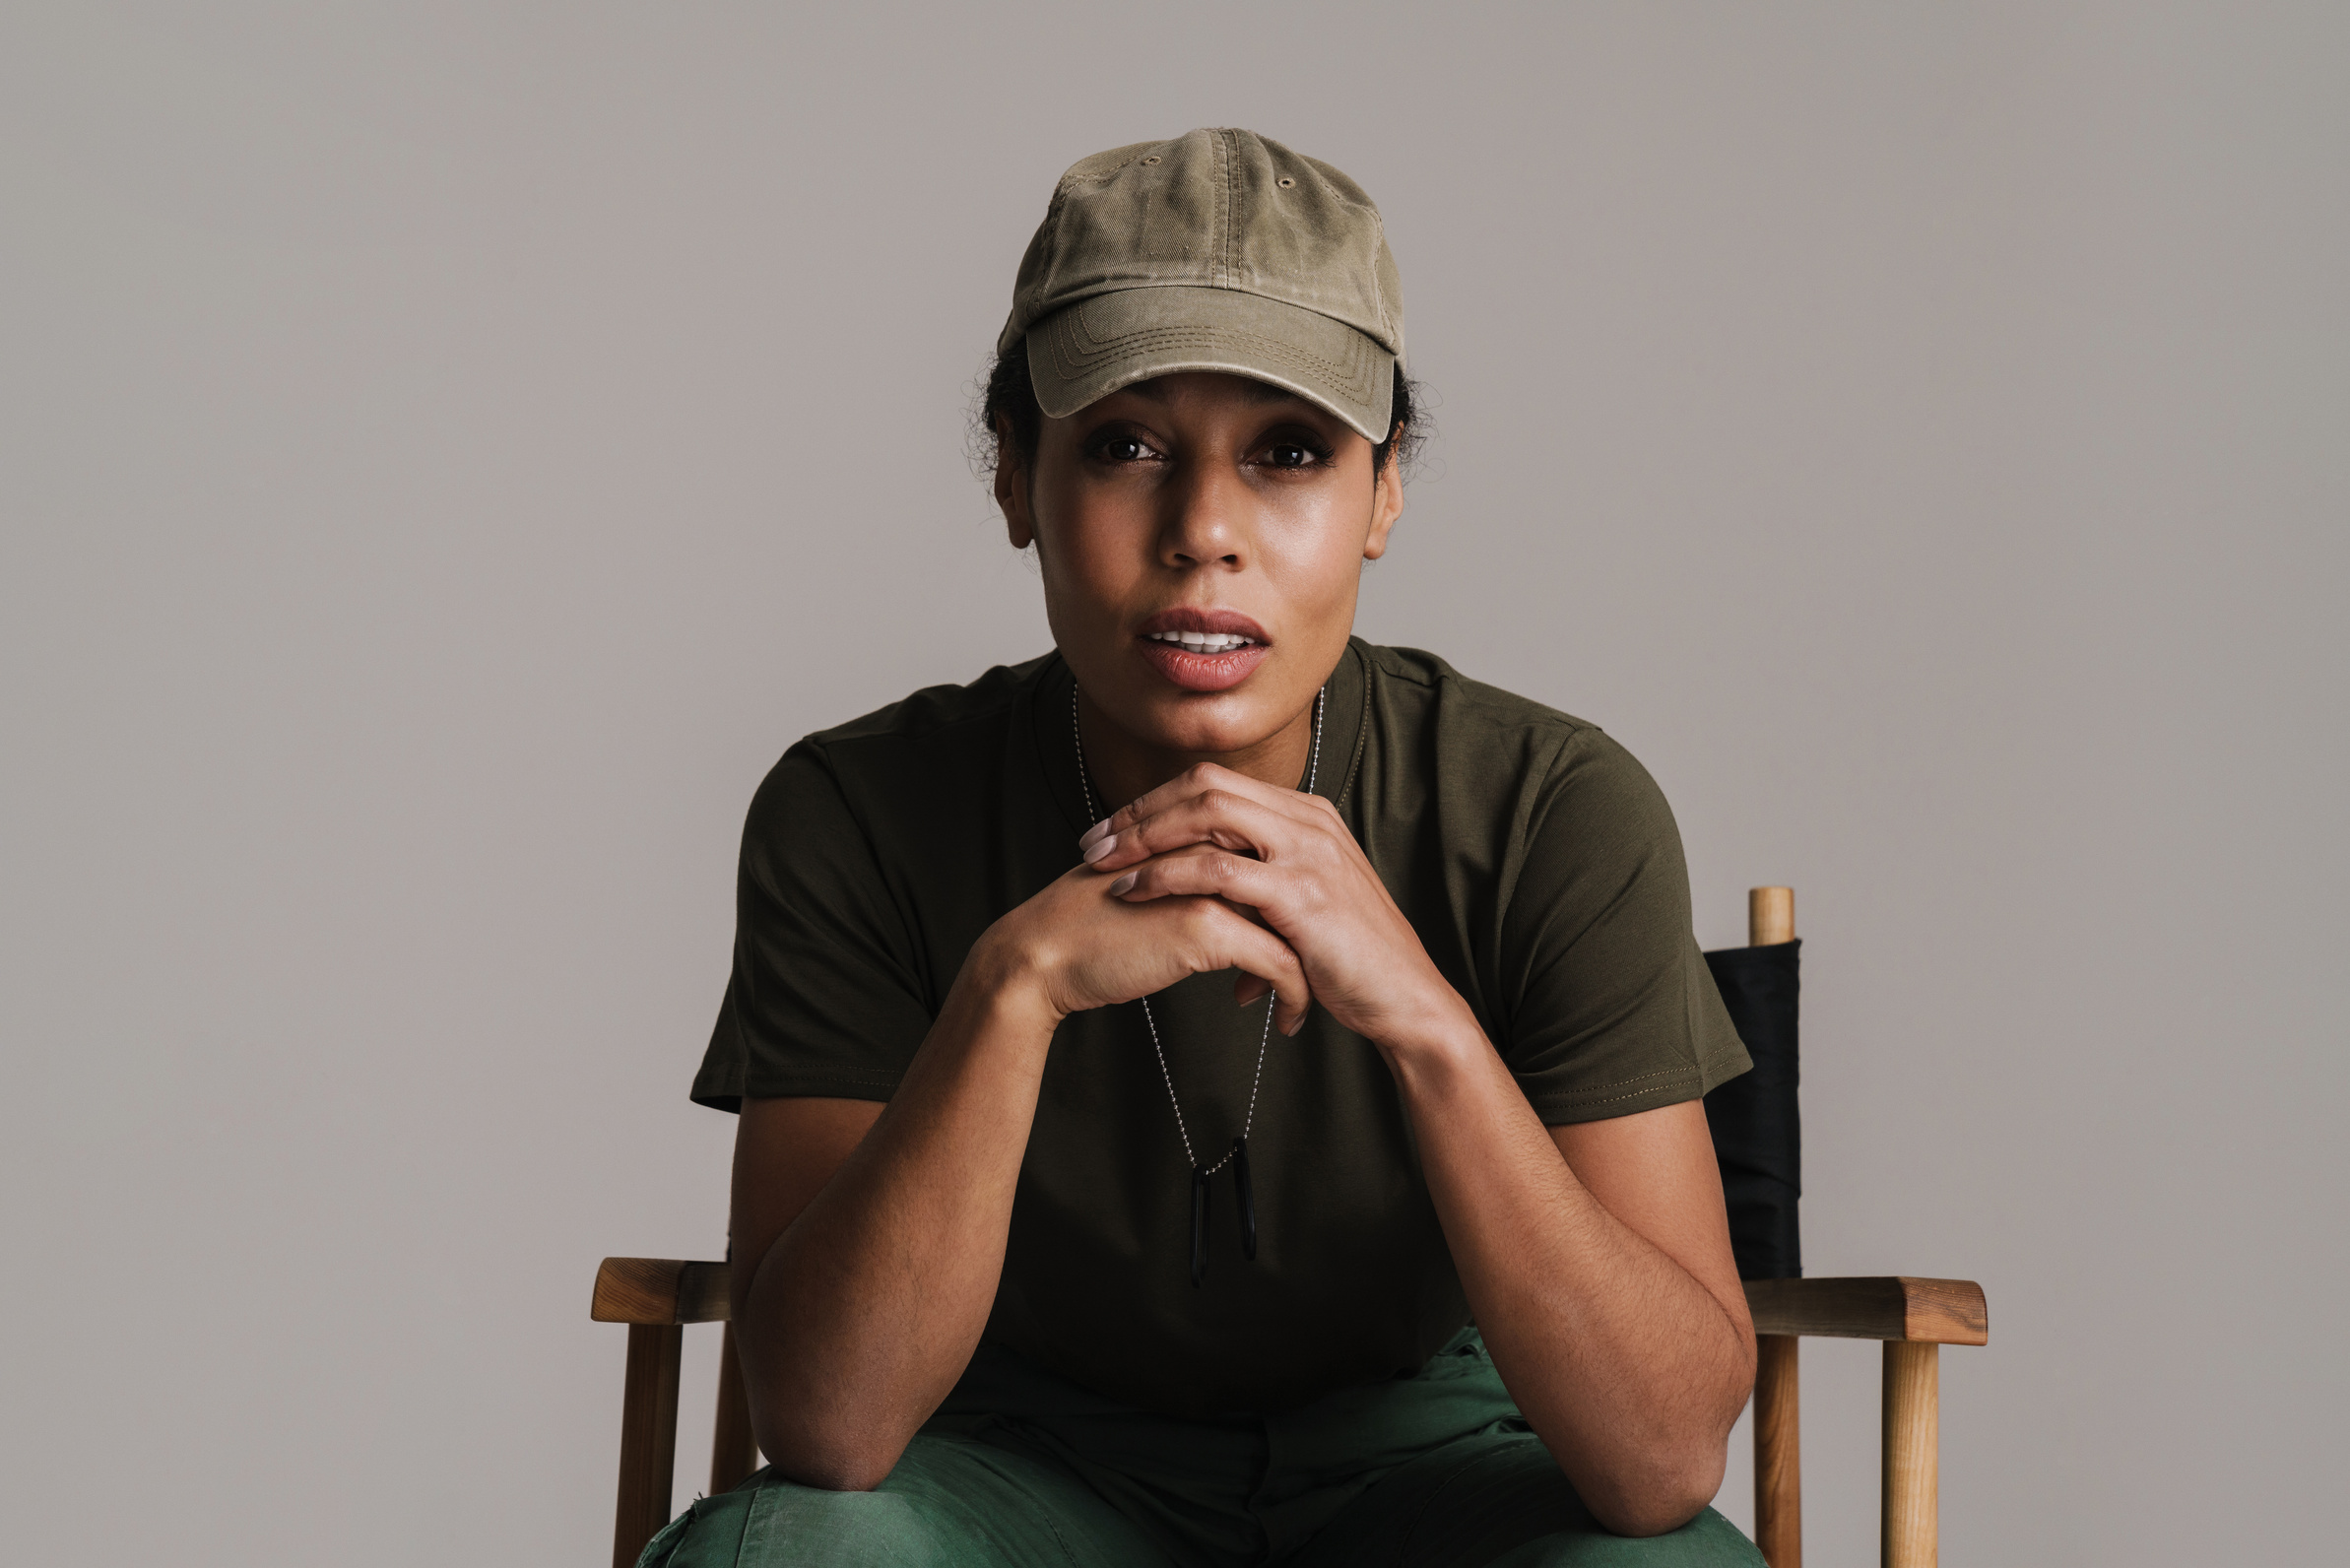 African American Soldier Woman Looking at Camera While Sitting on Chair